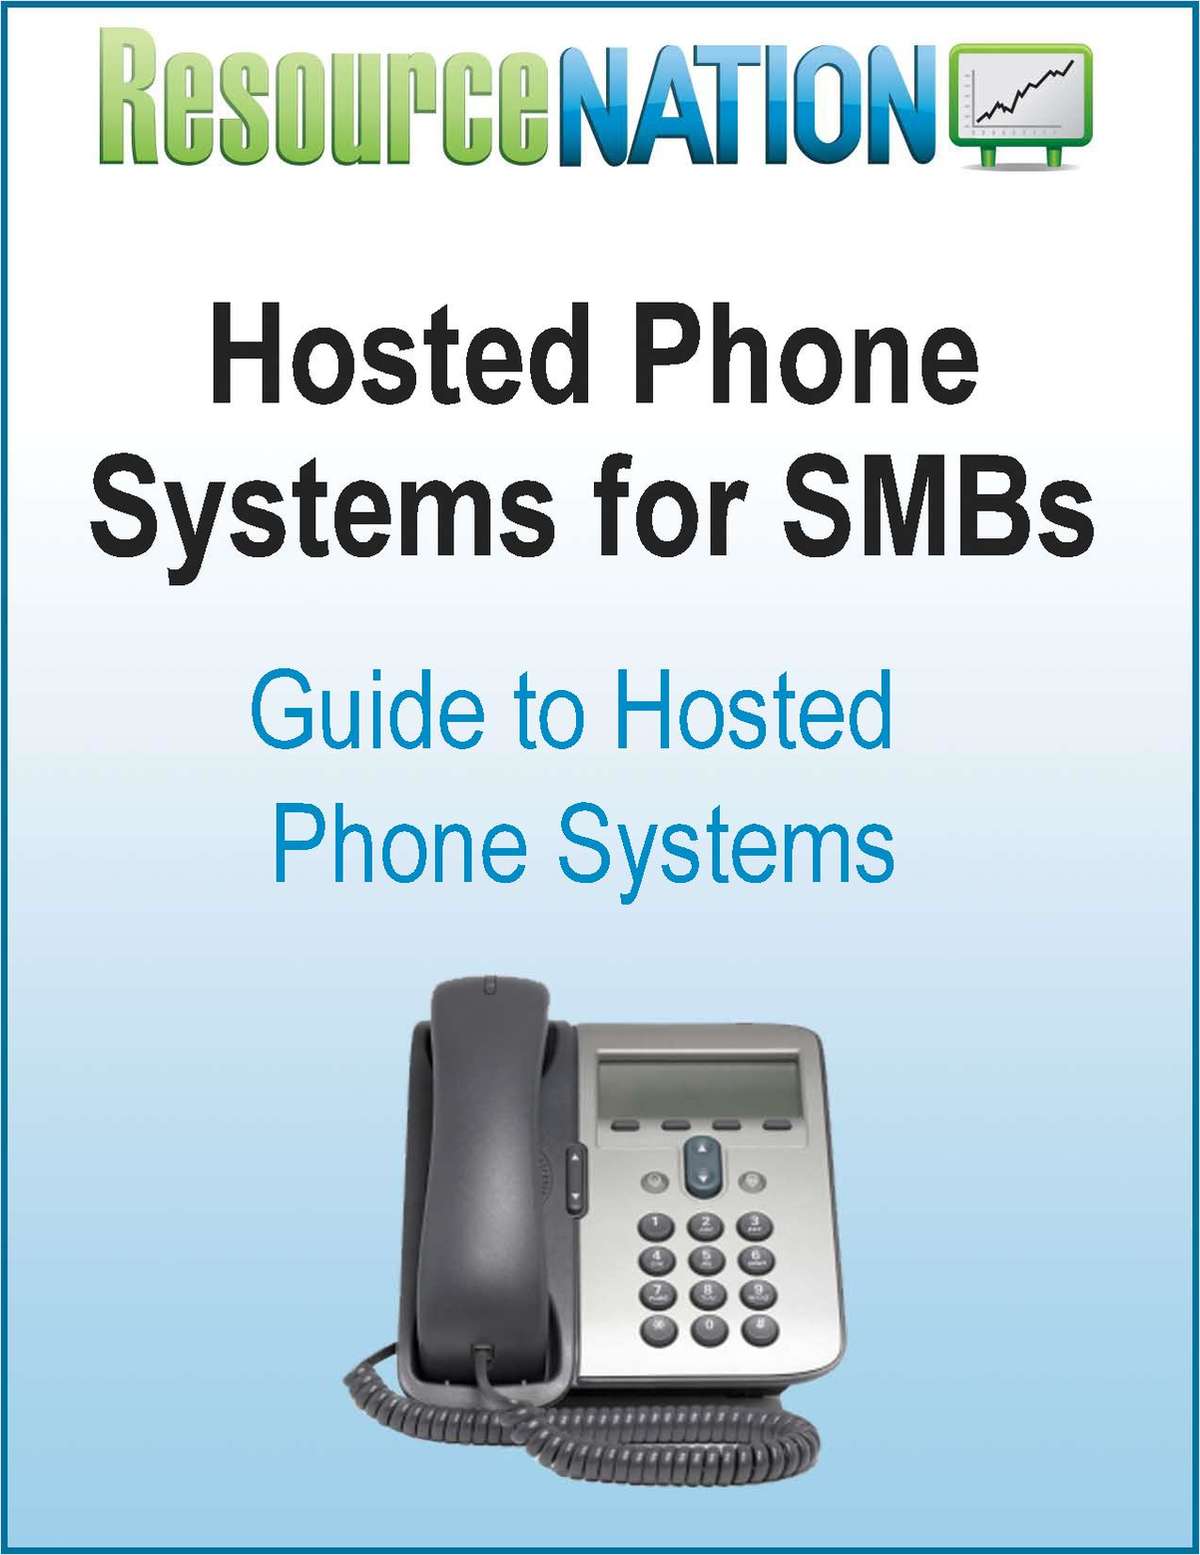 How To Choose The Best Hosted Phone System For Your SMB